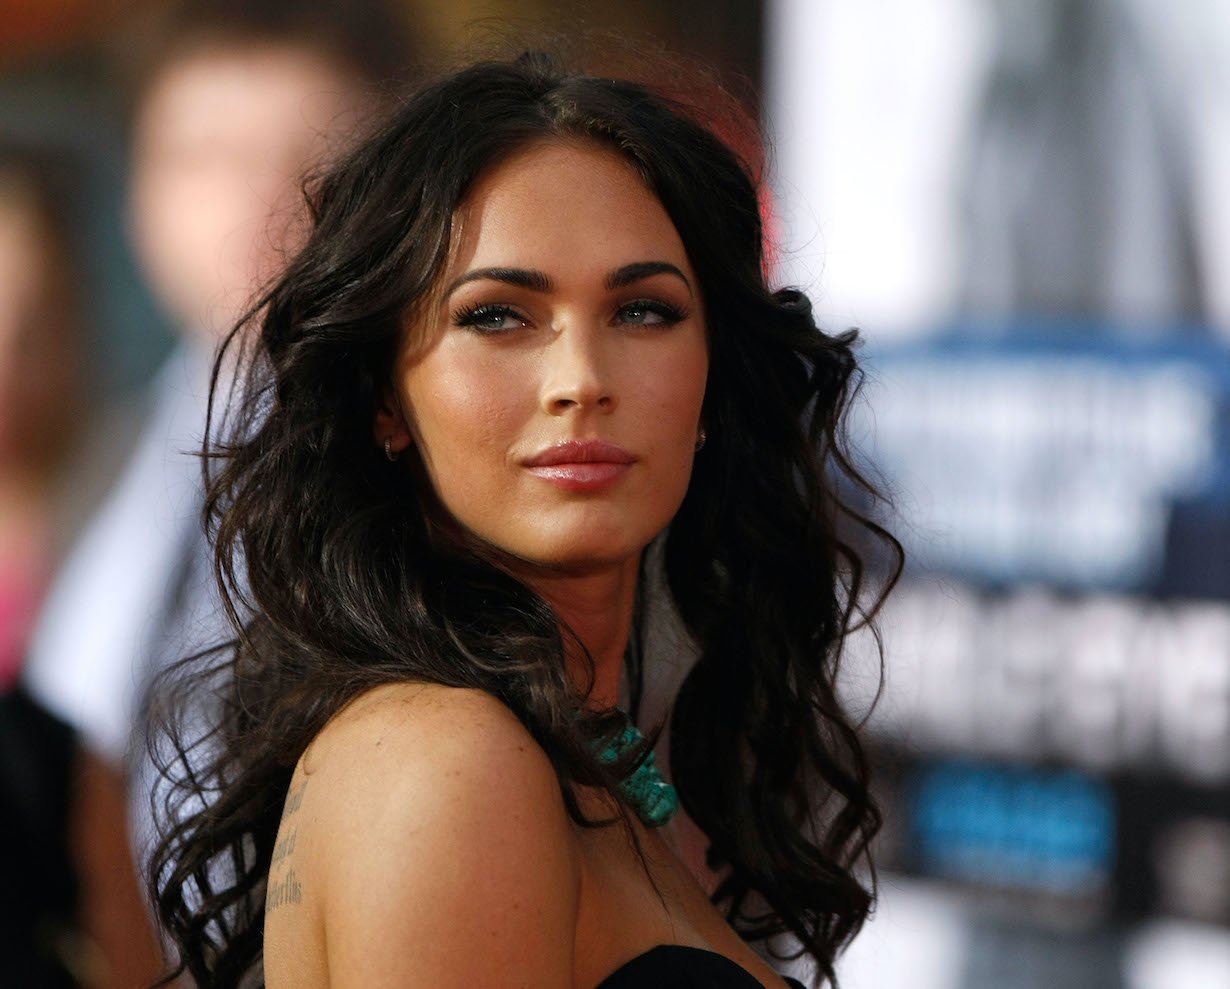 Crew Members Of Transformers Once Wrote A Sexist Letter About Megan Fox Calling Her An